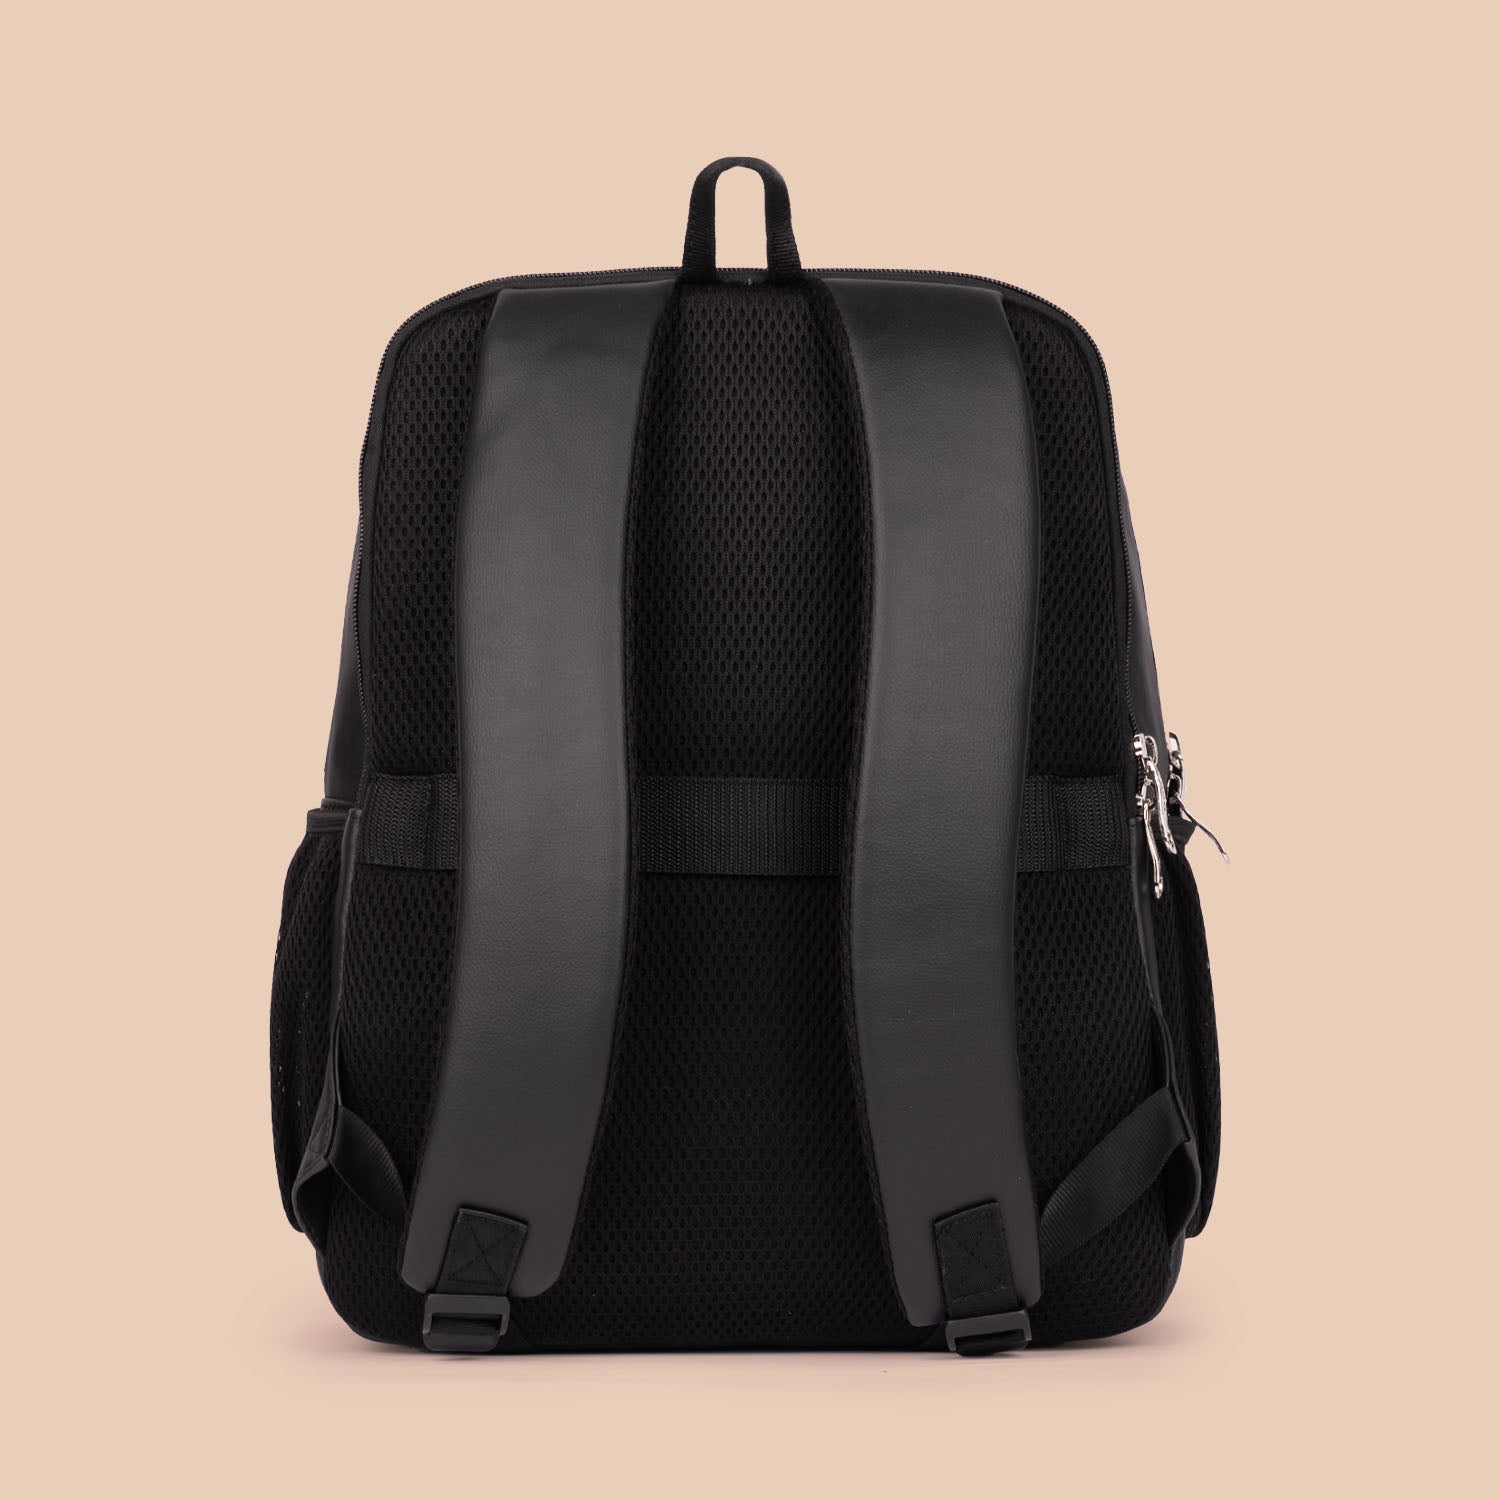 Agra Floral Office Backpack